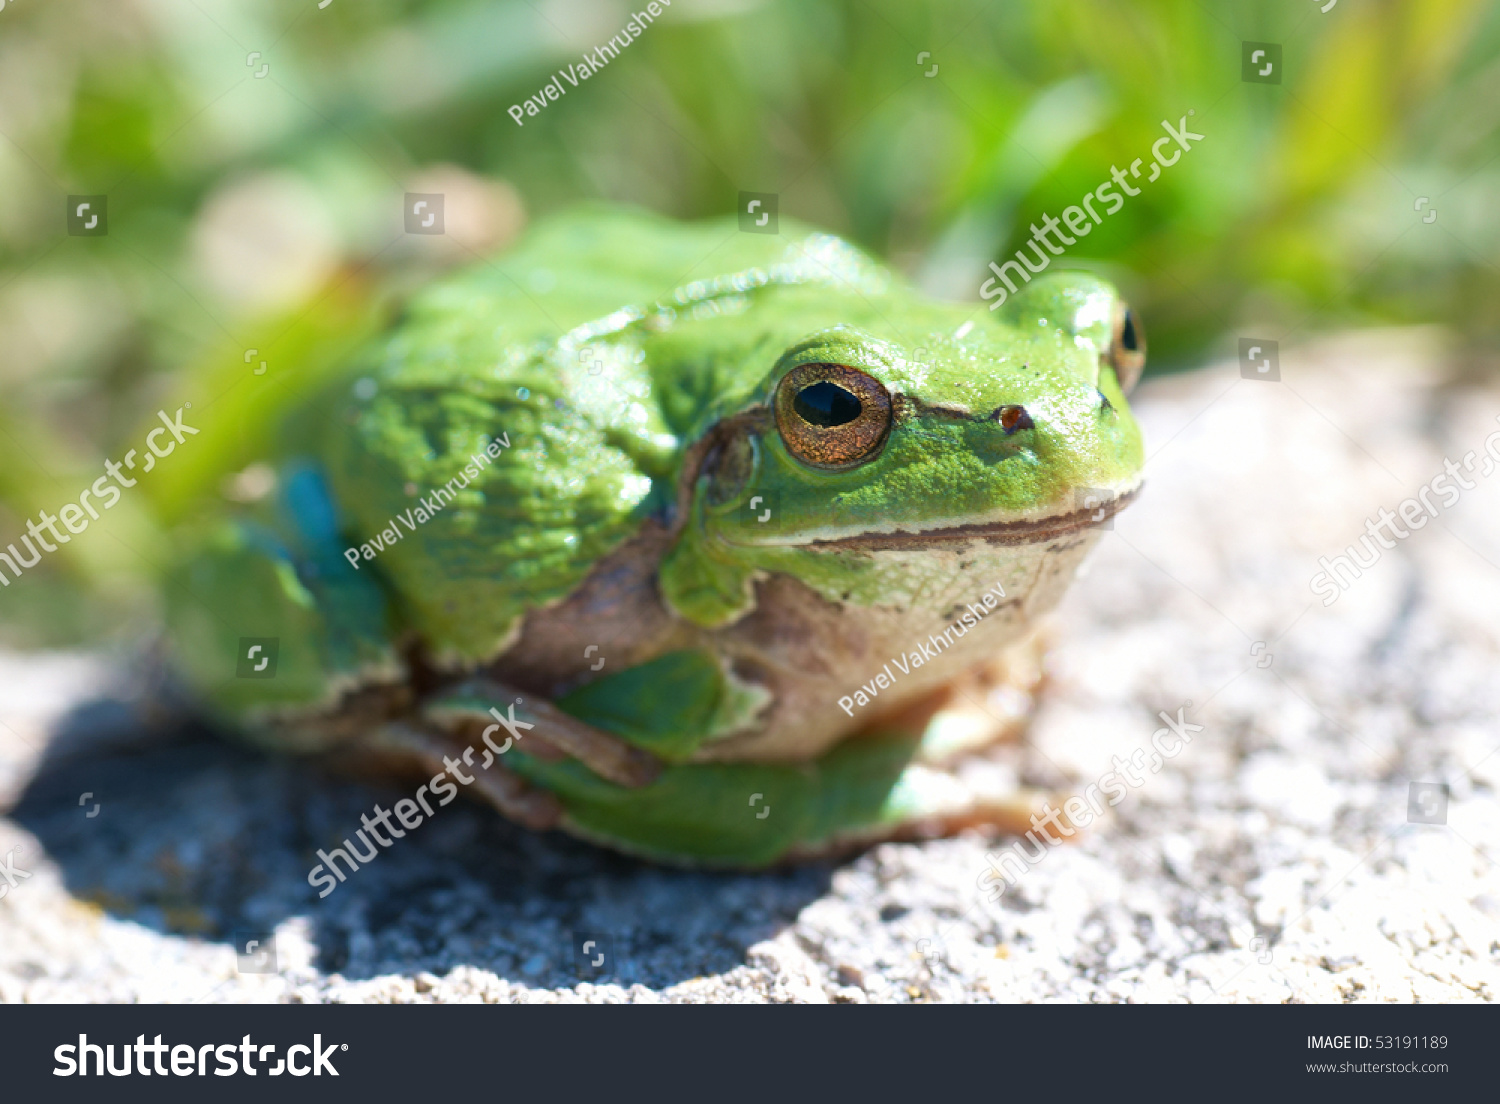 Green frog with grass background #53191189